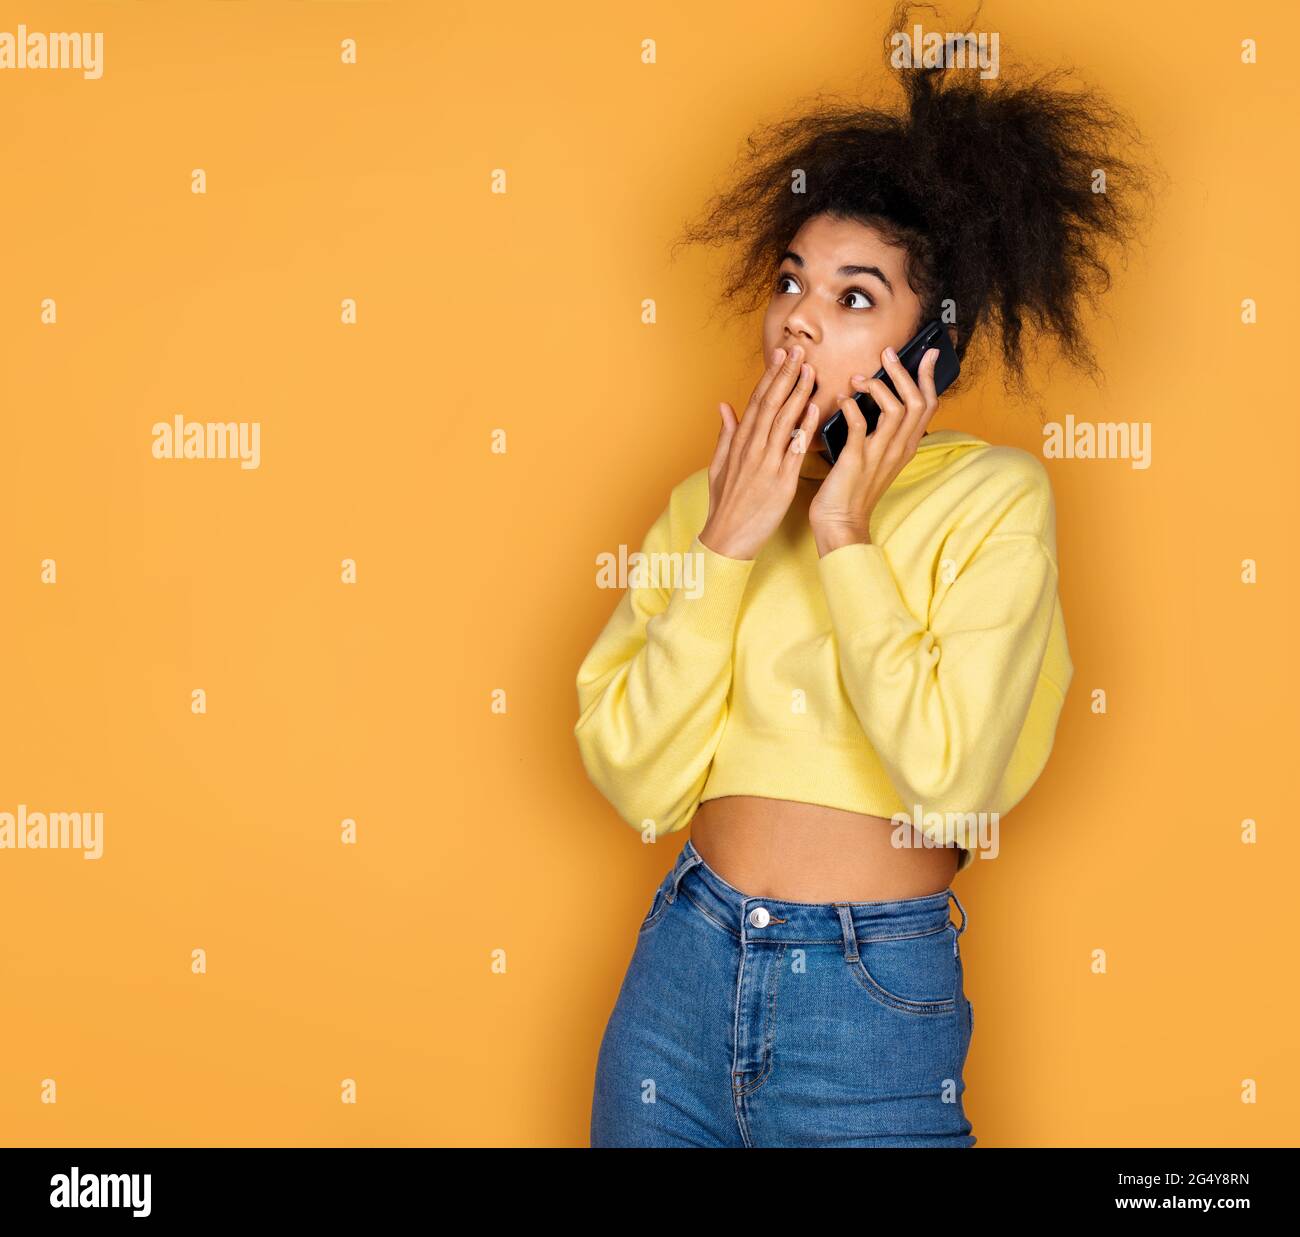 Girl is talking on the phone and looking shocked. Photo of african american girl on yellow background Stock Photo